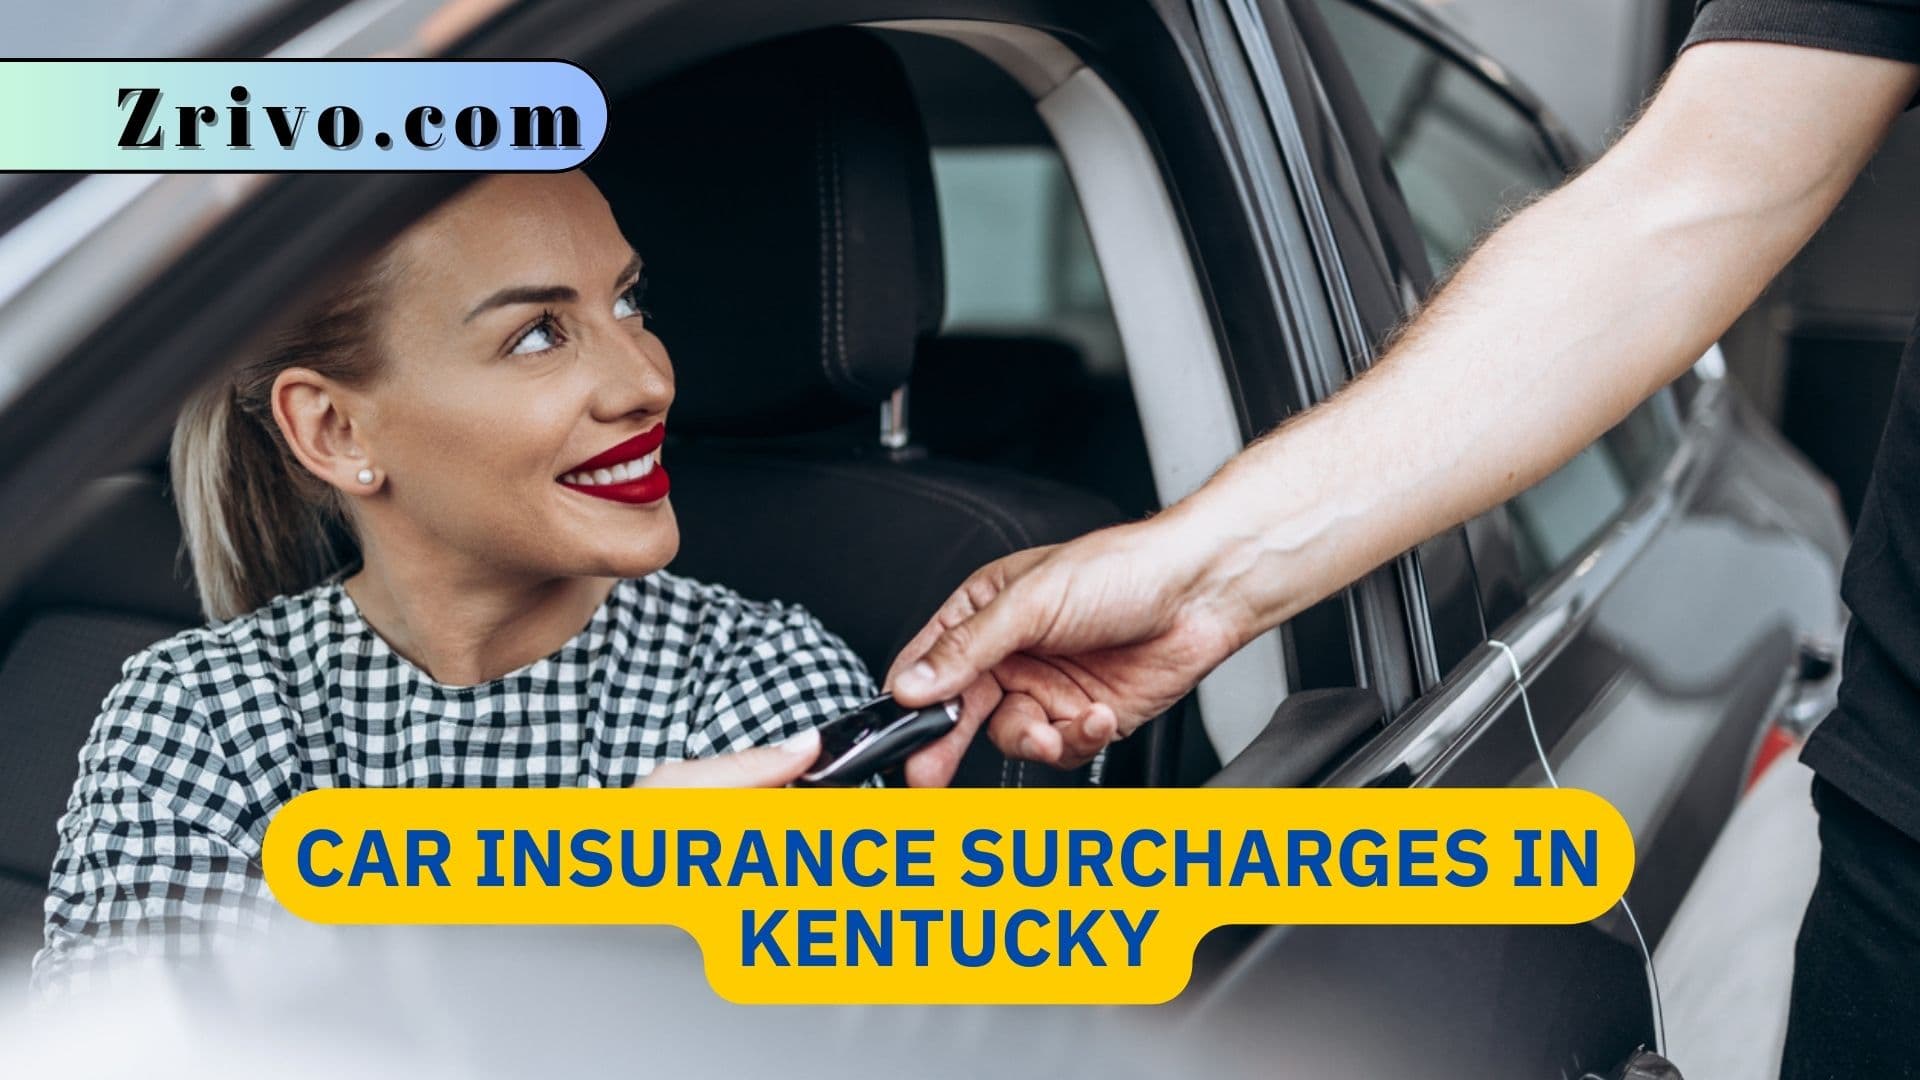 Car Insurance Surcharges in Kentucky